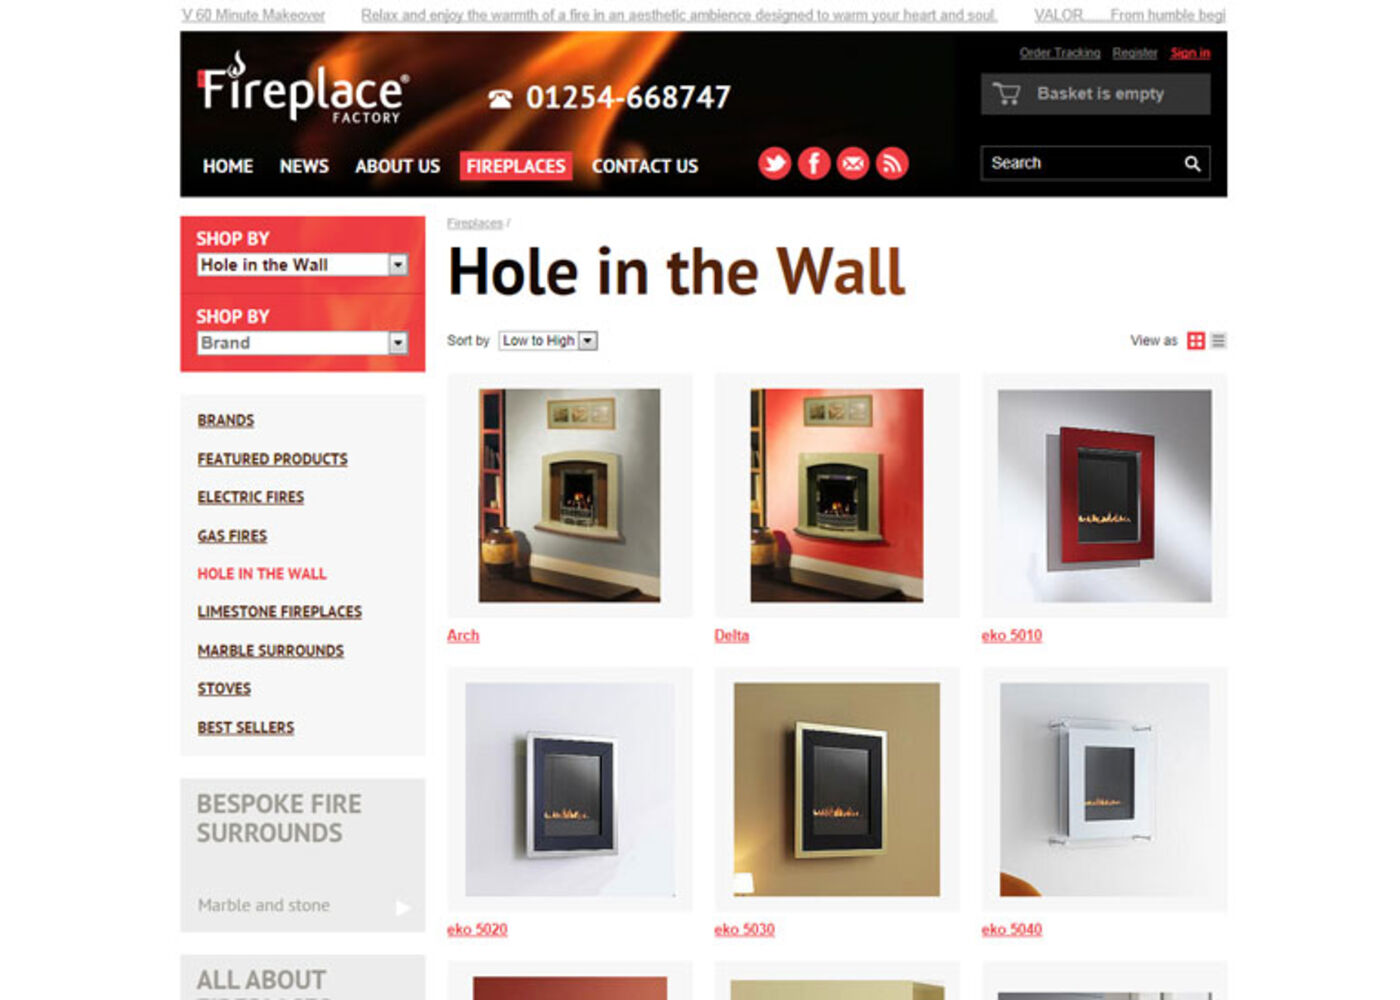 The Fireplace Factory Products